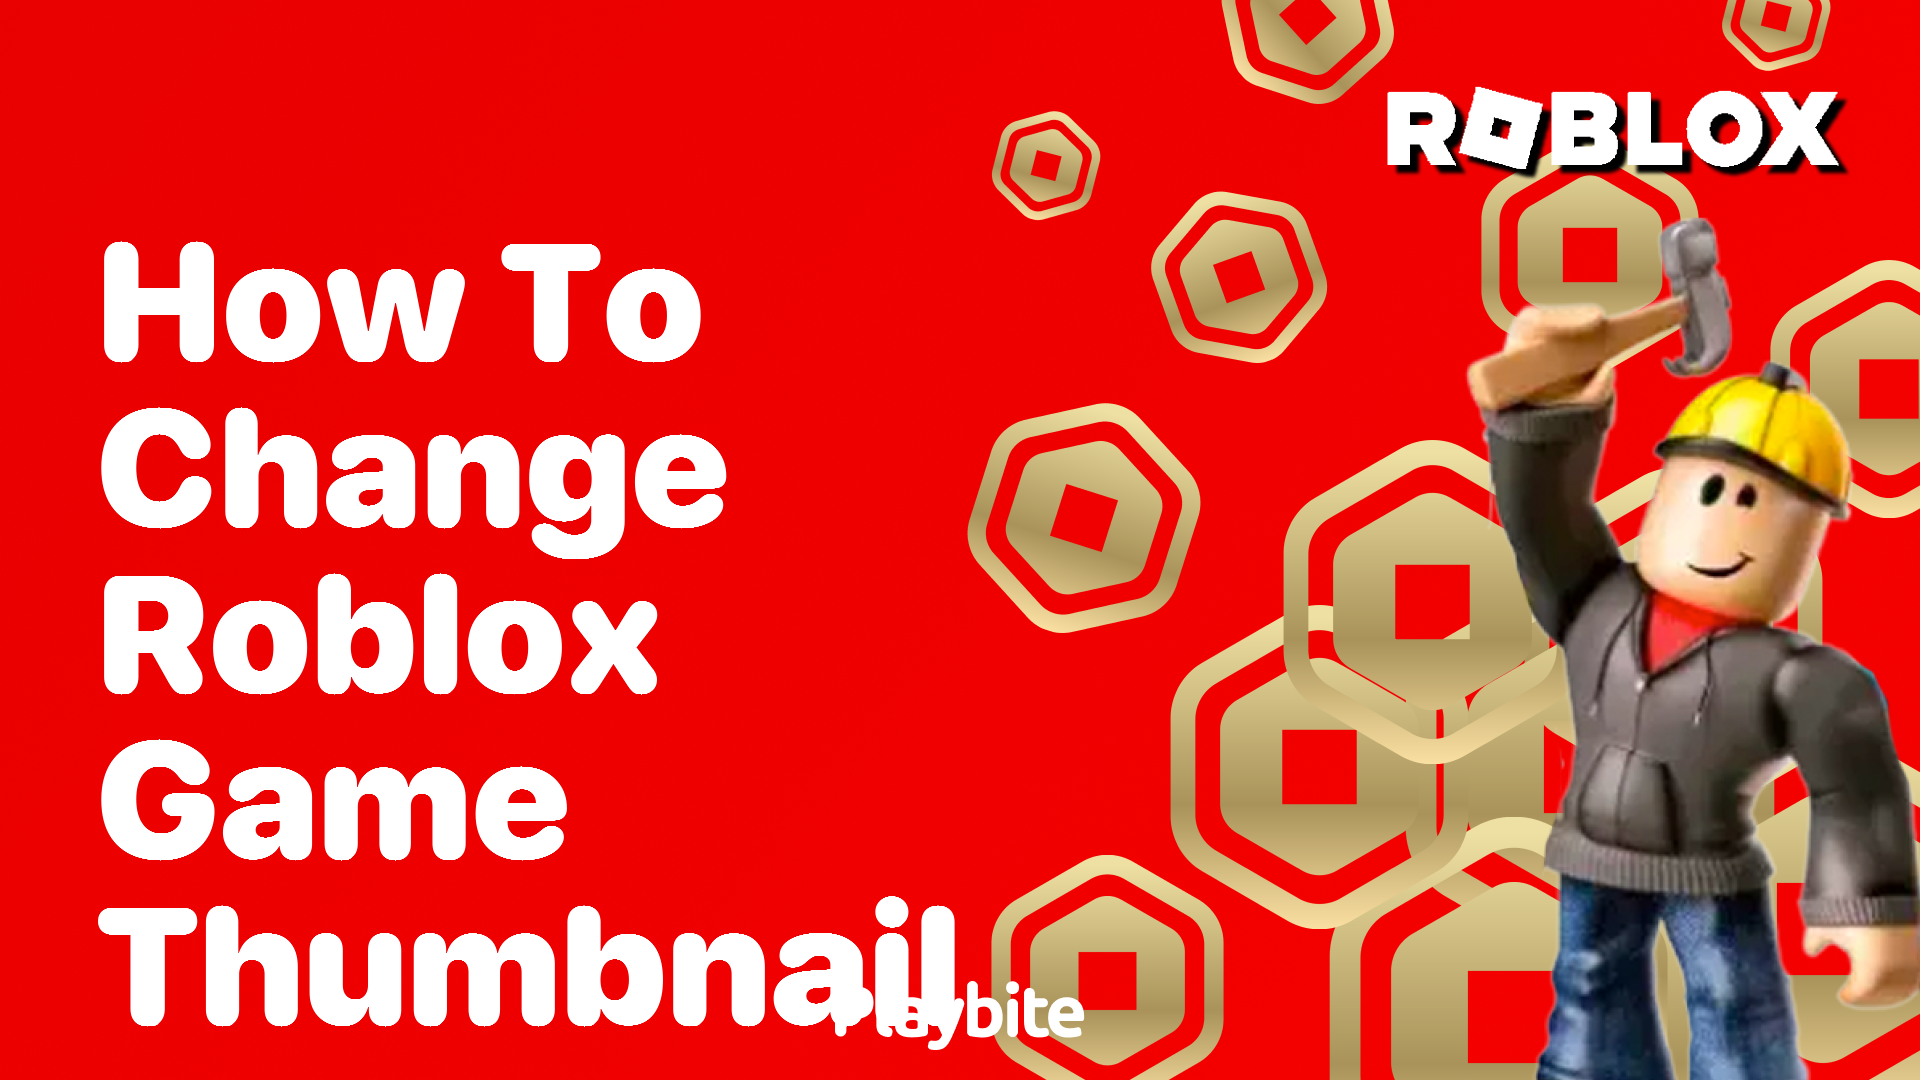 How to Change Your Roblox Game Thumbnail &#8211; A Quick Guide